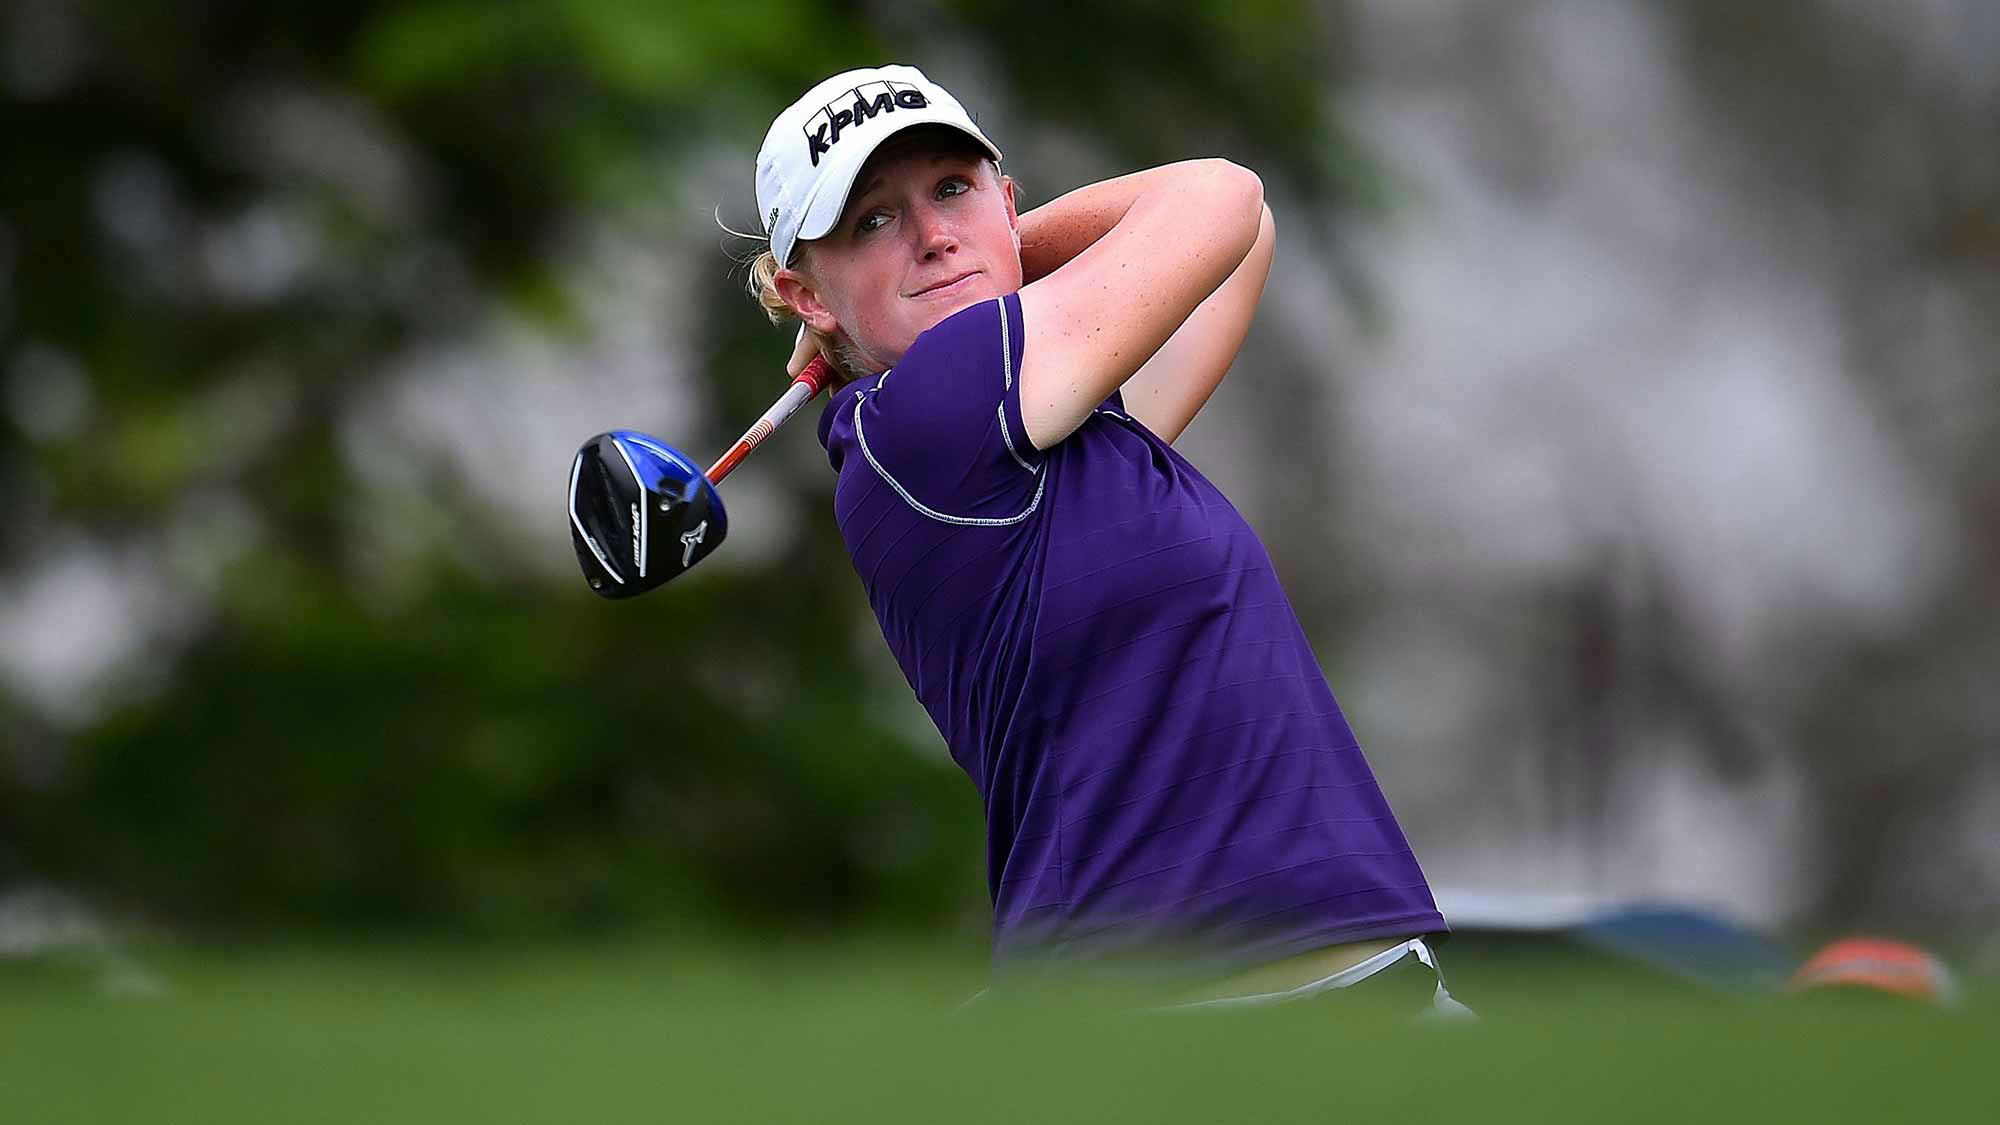 Stacy Lewis at 2015 LPGA Thailand - Day 2